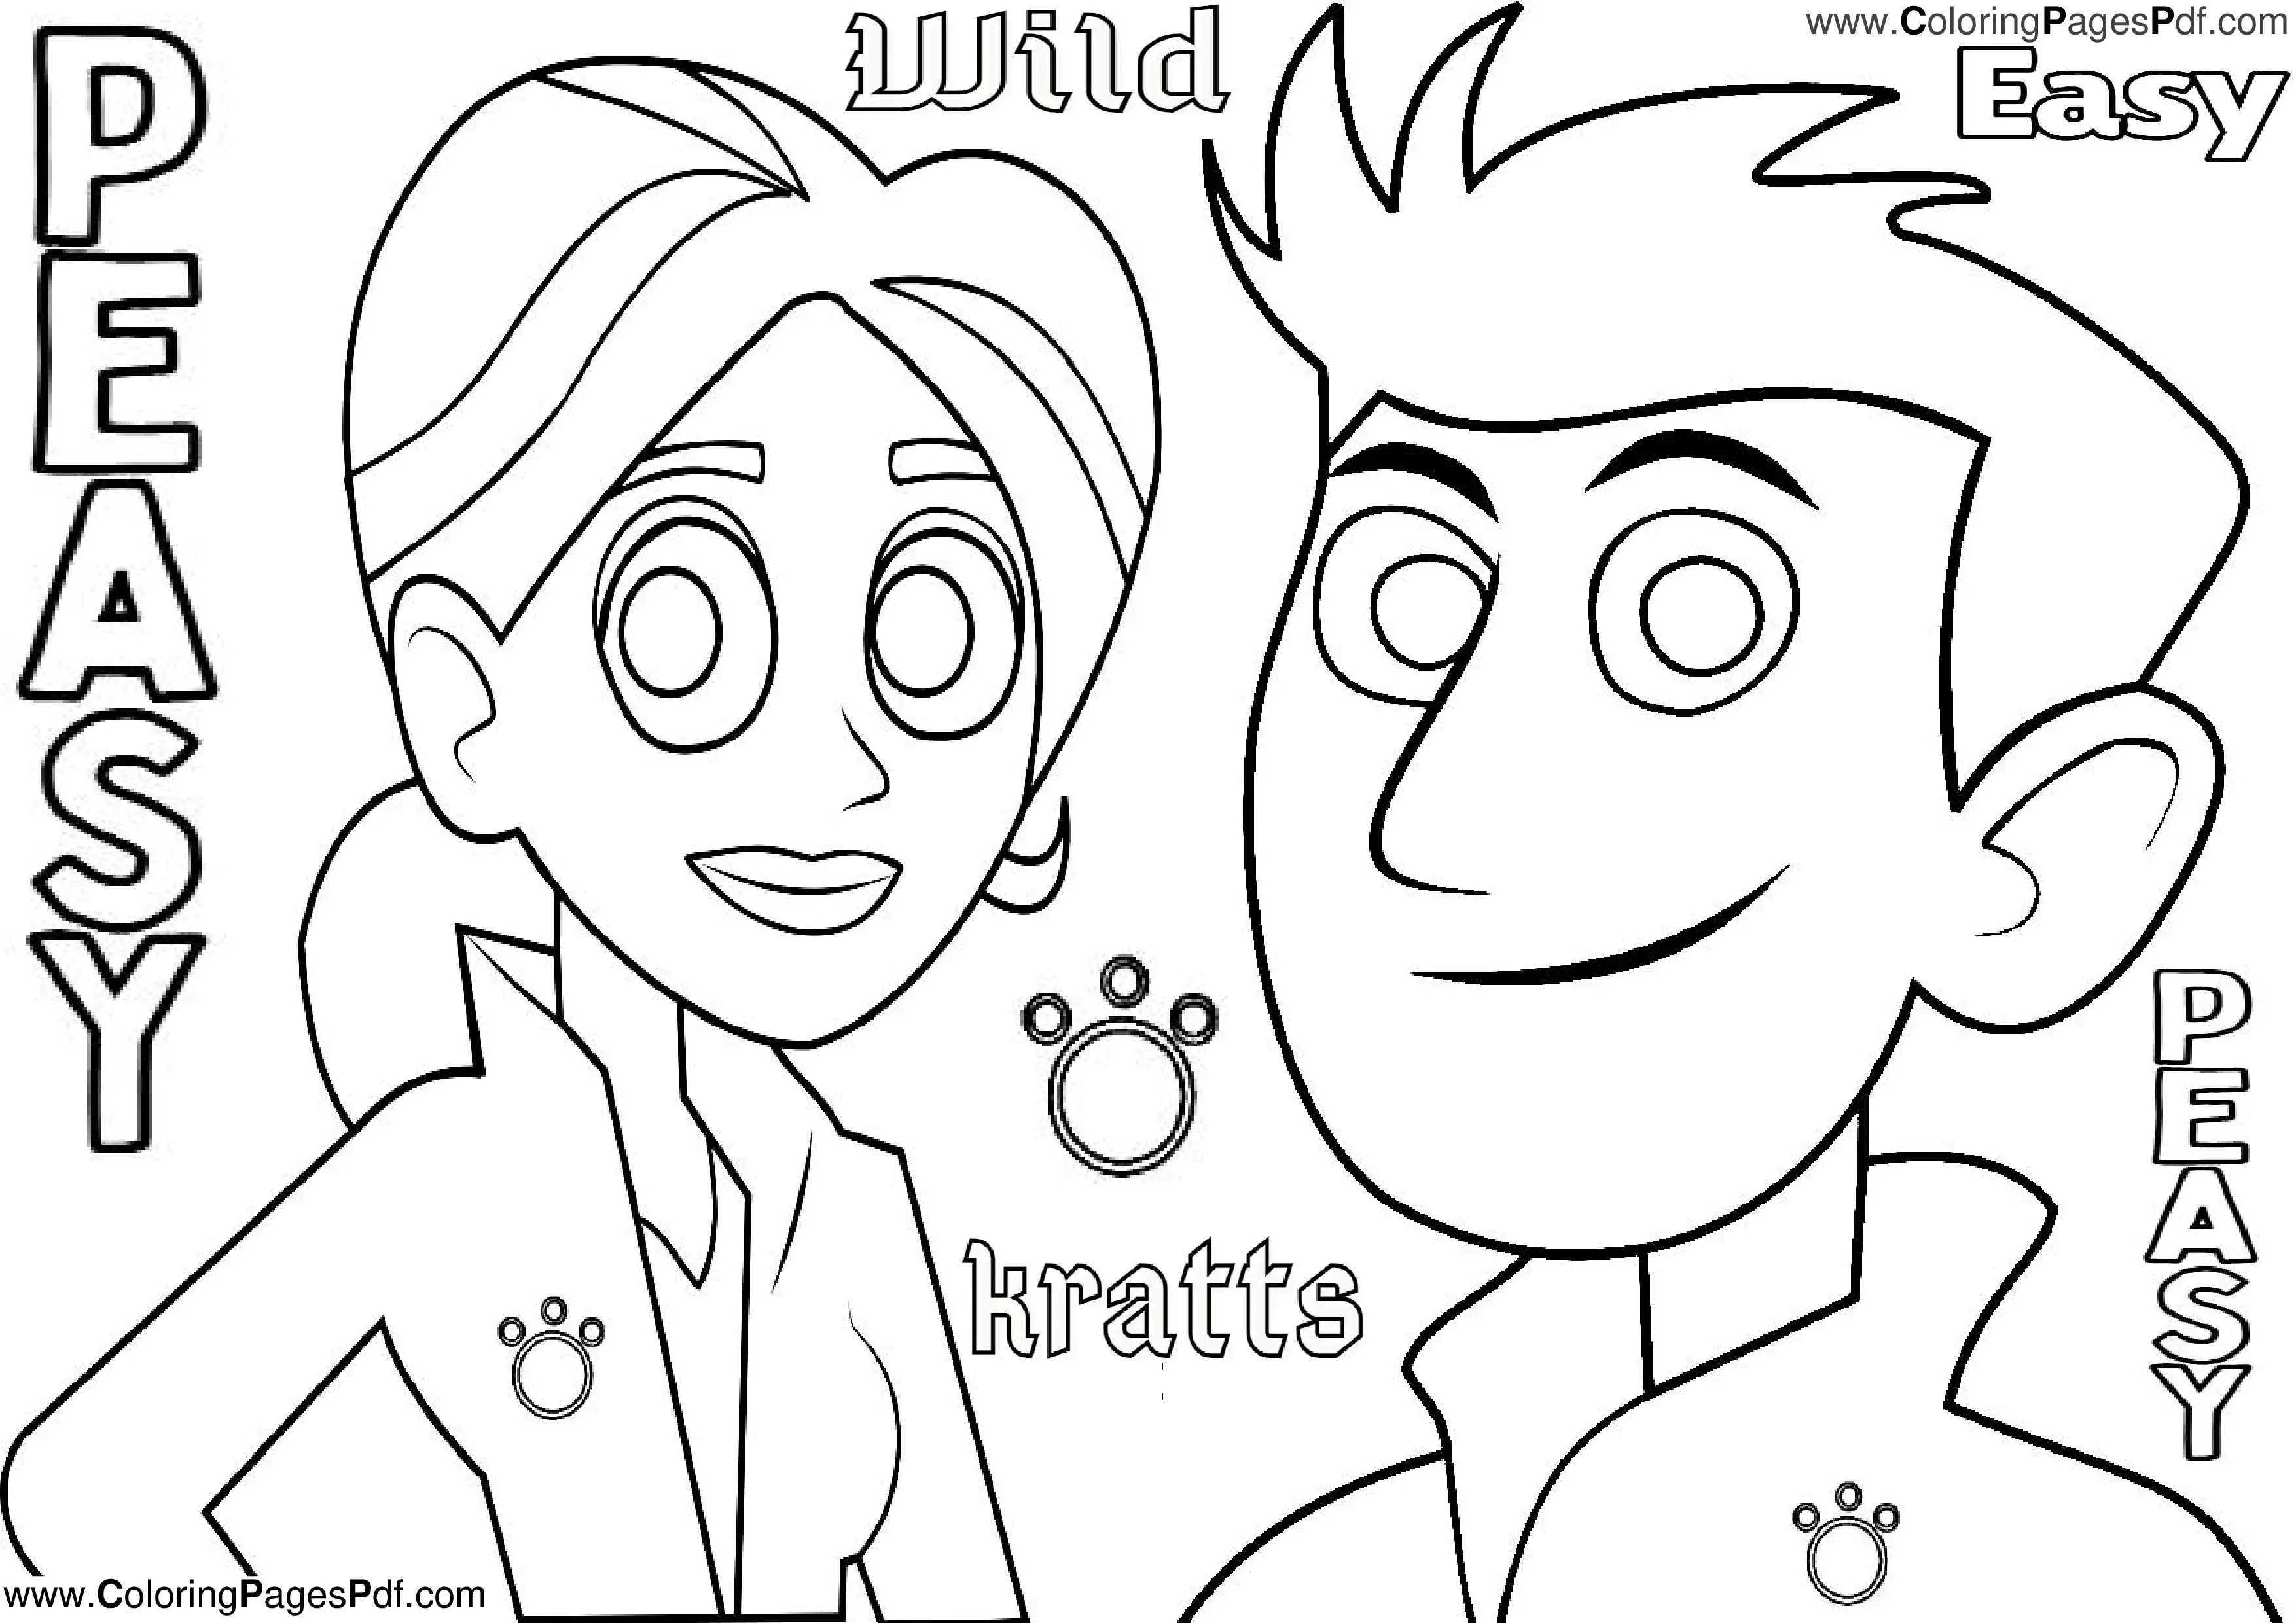 Wild kratts coloring pages for kids